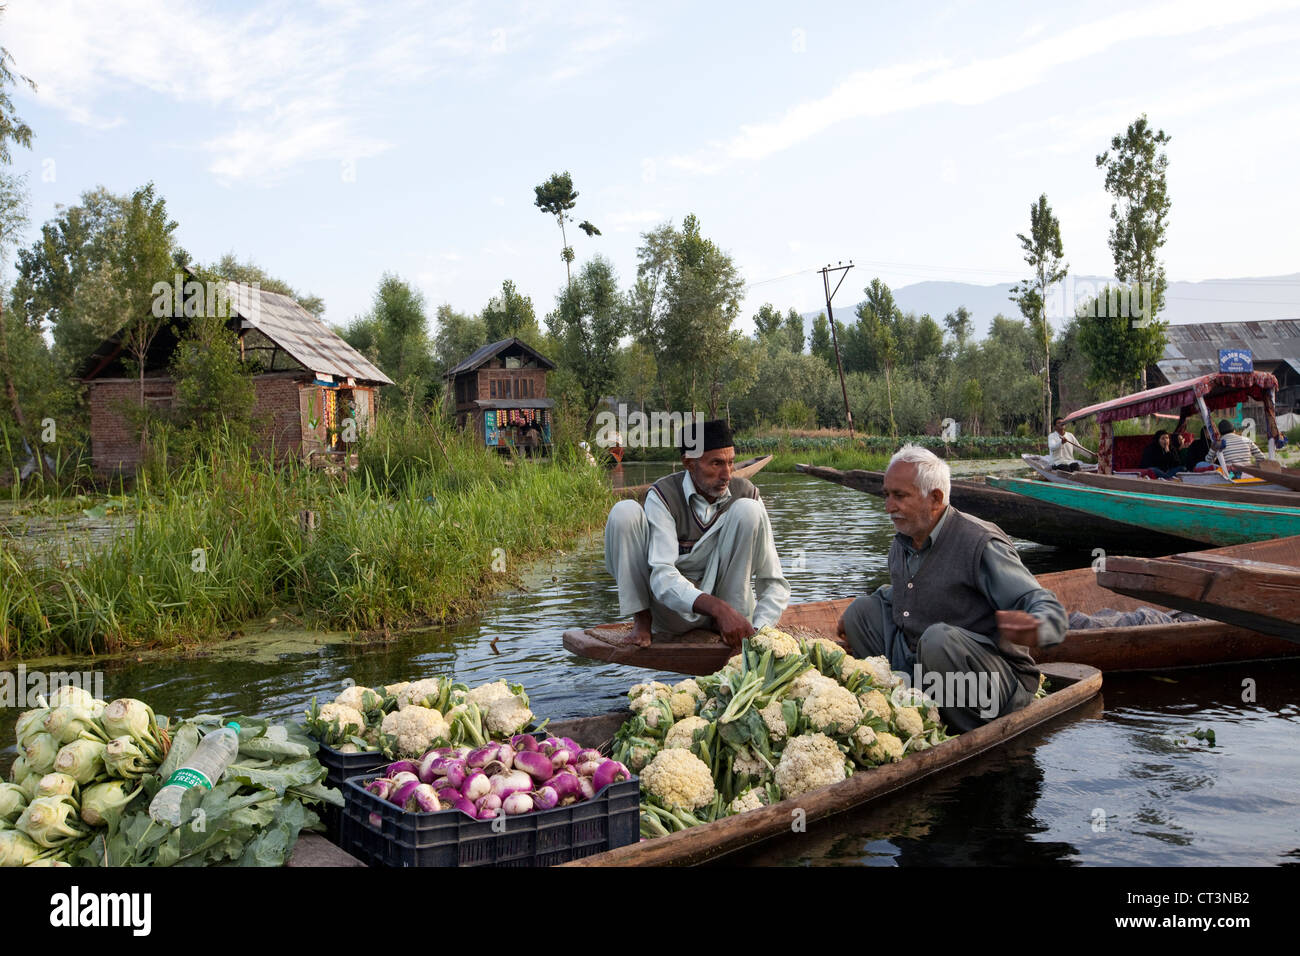 Vegetable sellers on Dal Lake shortly after dawn at the vegetable market Stock Photo